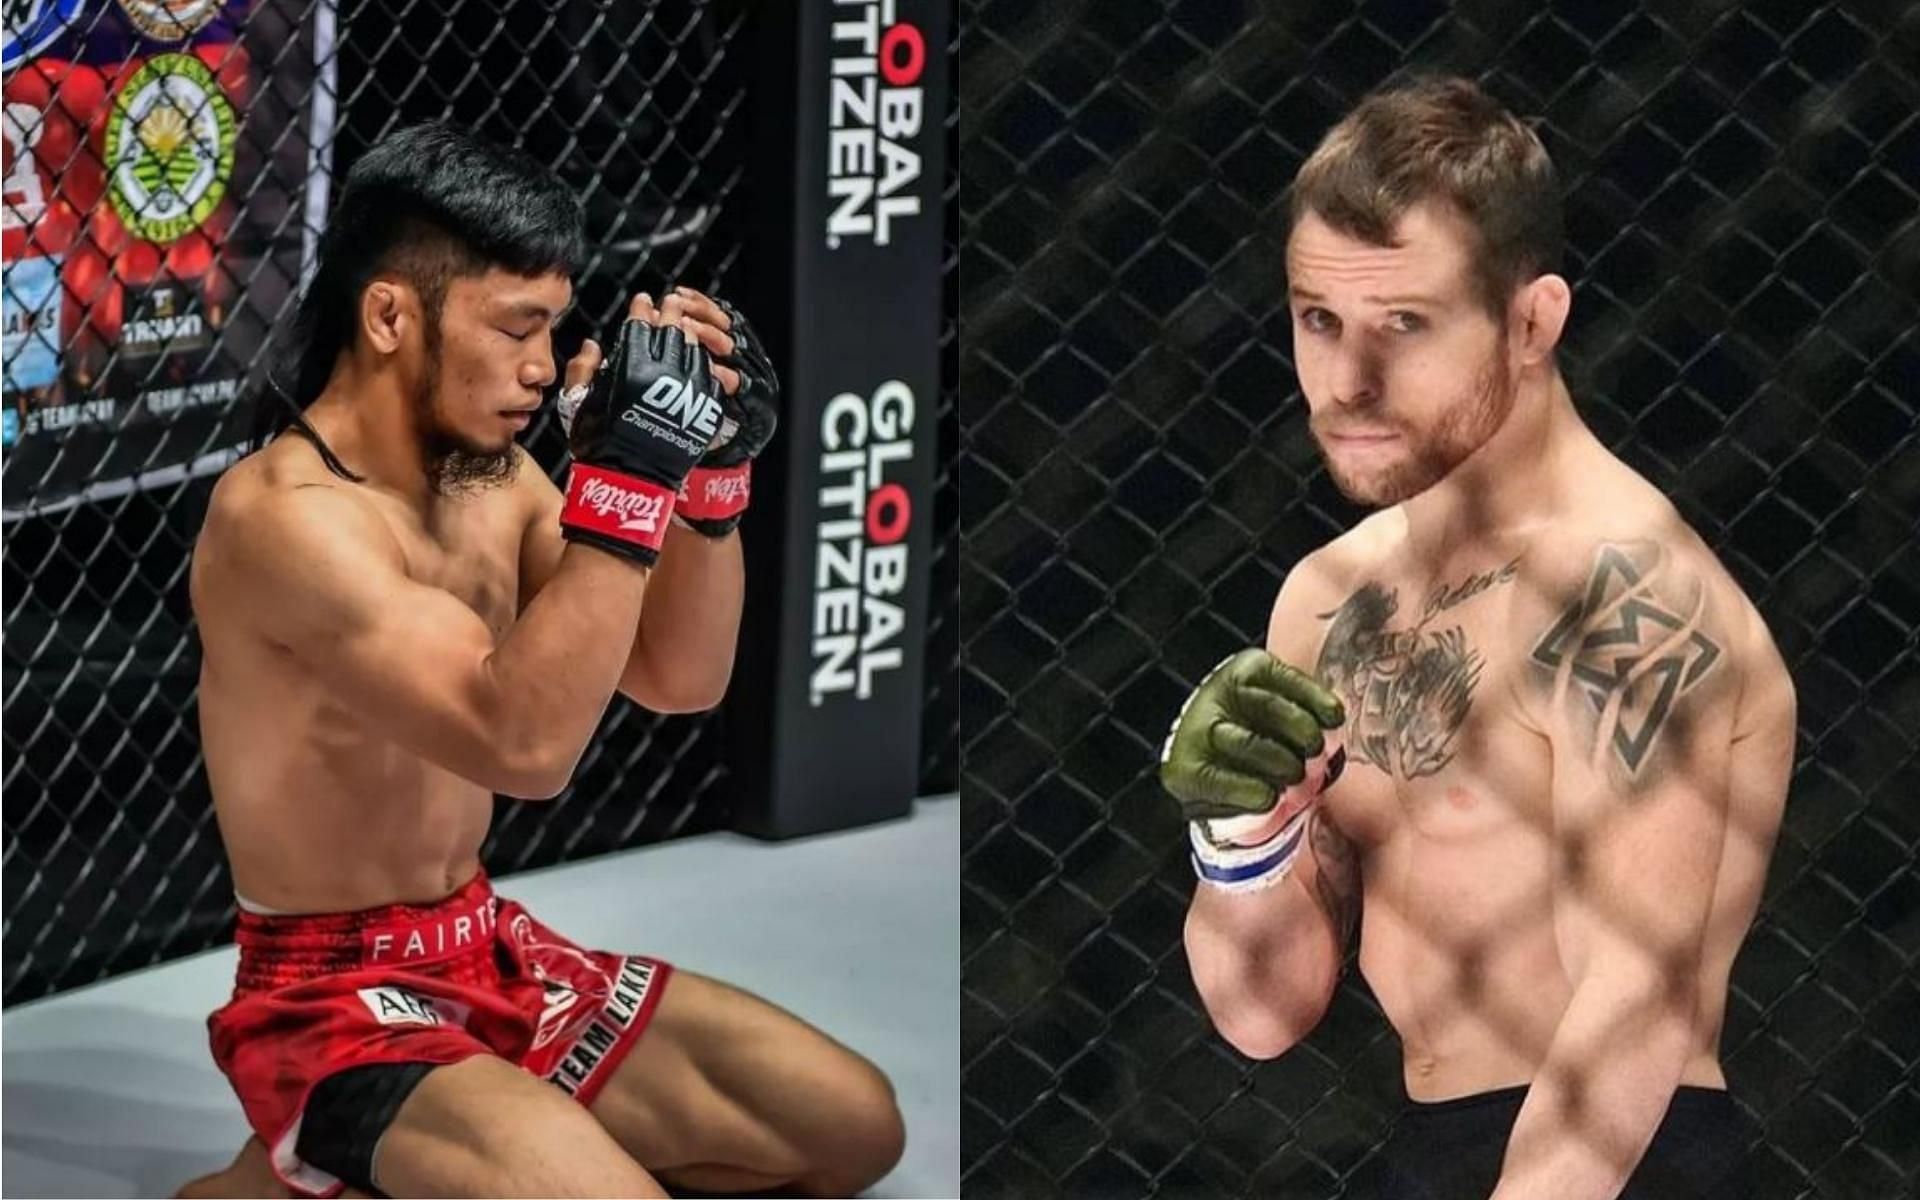 ONE Championship strawweight Lito Adiwang (left) and newcomer Jarred Brooks (right) will fight in the main event of ONE: NEXTGEN III. (Images credit: @litoadiwang and @the_monkeygod on Instagram)